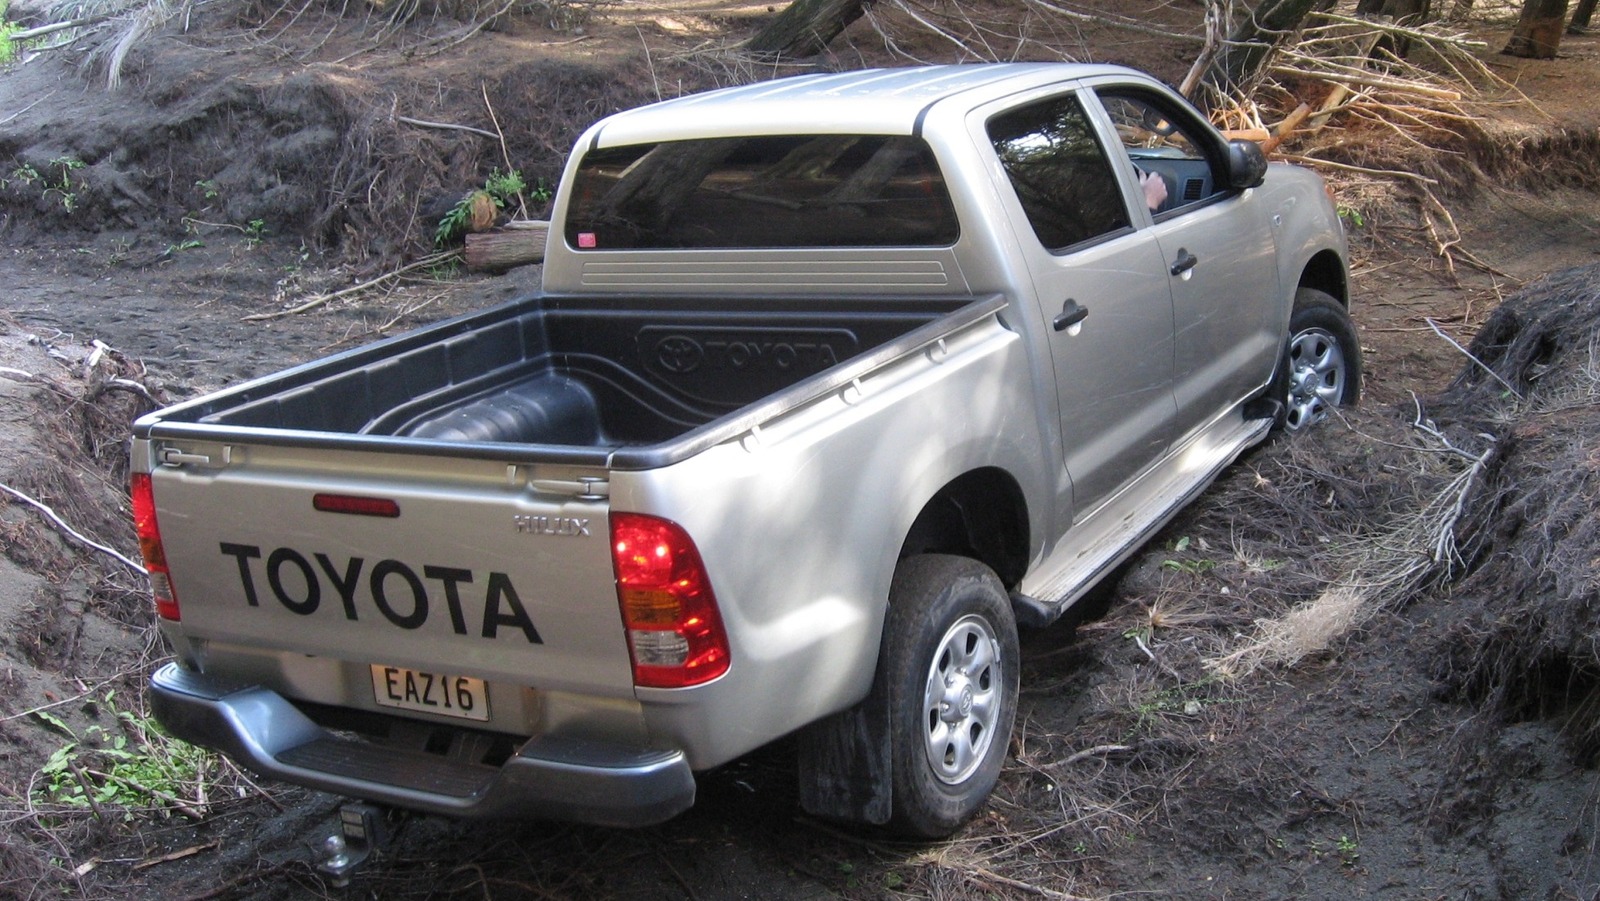 The Real Reason Why The Indestructible Toyota Hilux Isn't Available In The  U.S.